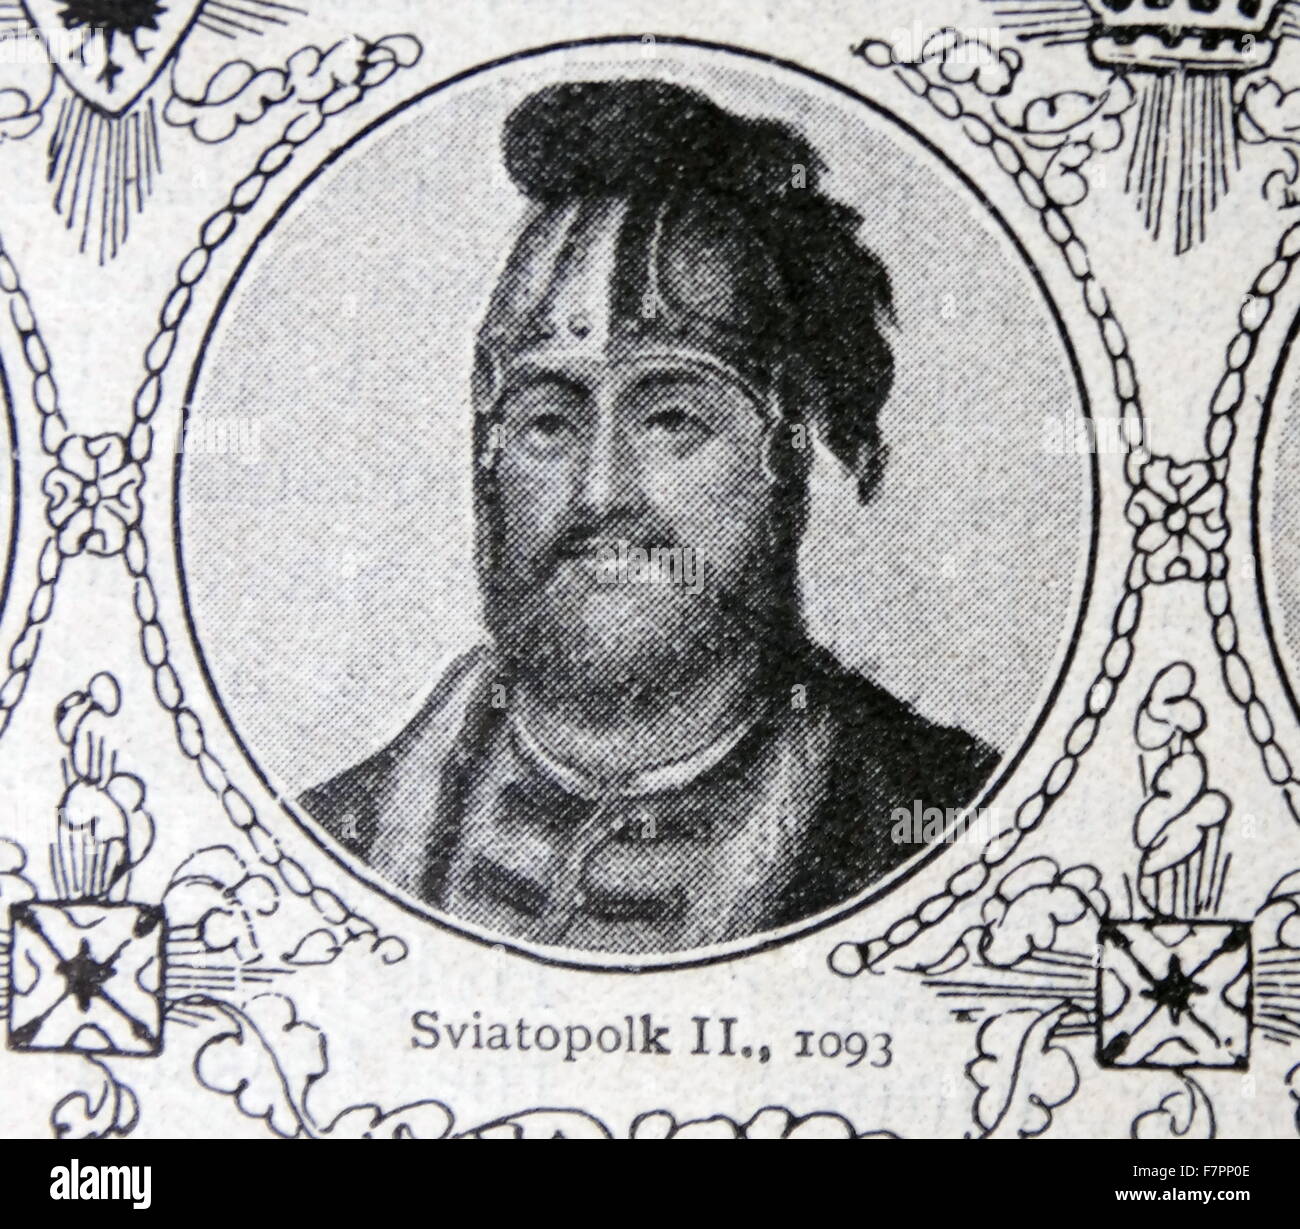 Sviatopolk II Iziaslavich (1050 – April 16, 1113) was supreme ruler of the Kievan Rus for 20 years, from 1093 to 1113. He was not a popular prince, and his reign was marked by incessant rivalry with his cousin Vladimir Monomakh. Stock Photo